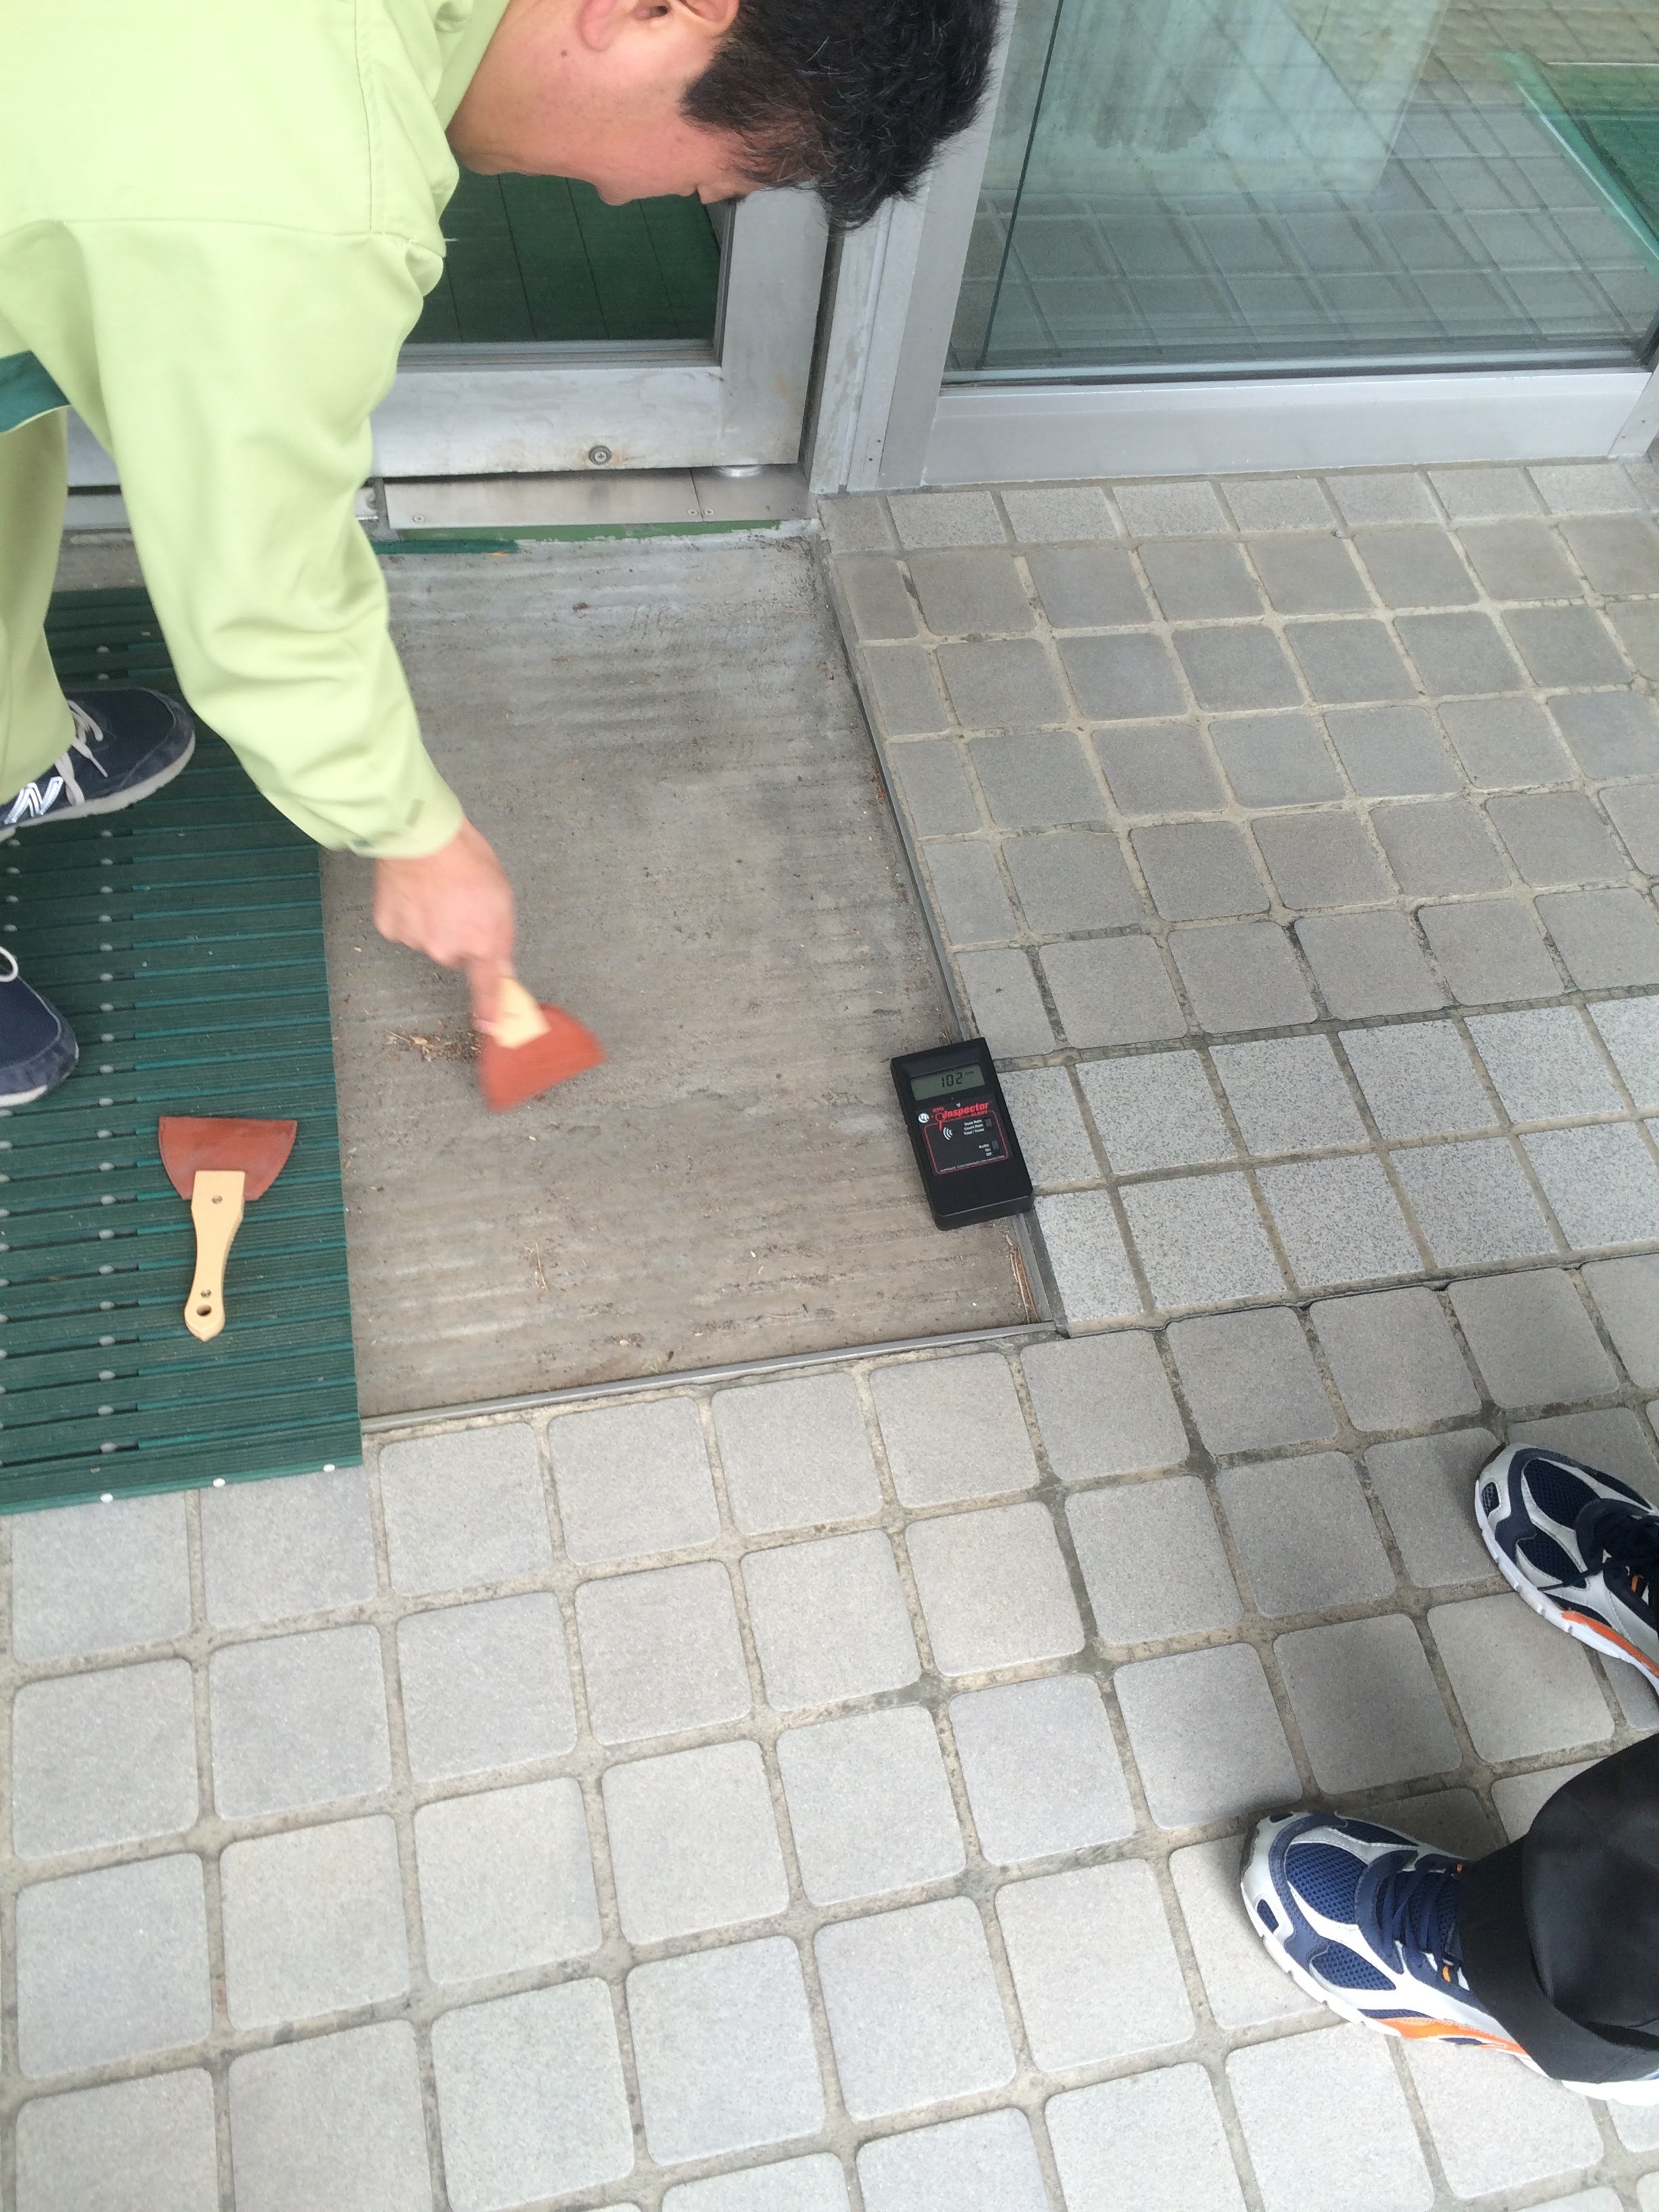 Taking dust samples underneath floor matts at a convenience store. Proves radiation is being spread everywhere.